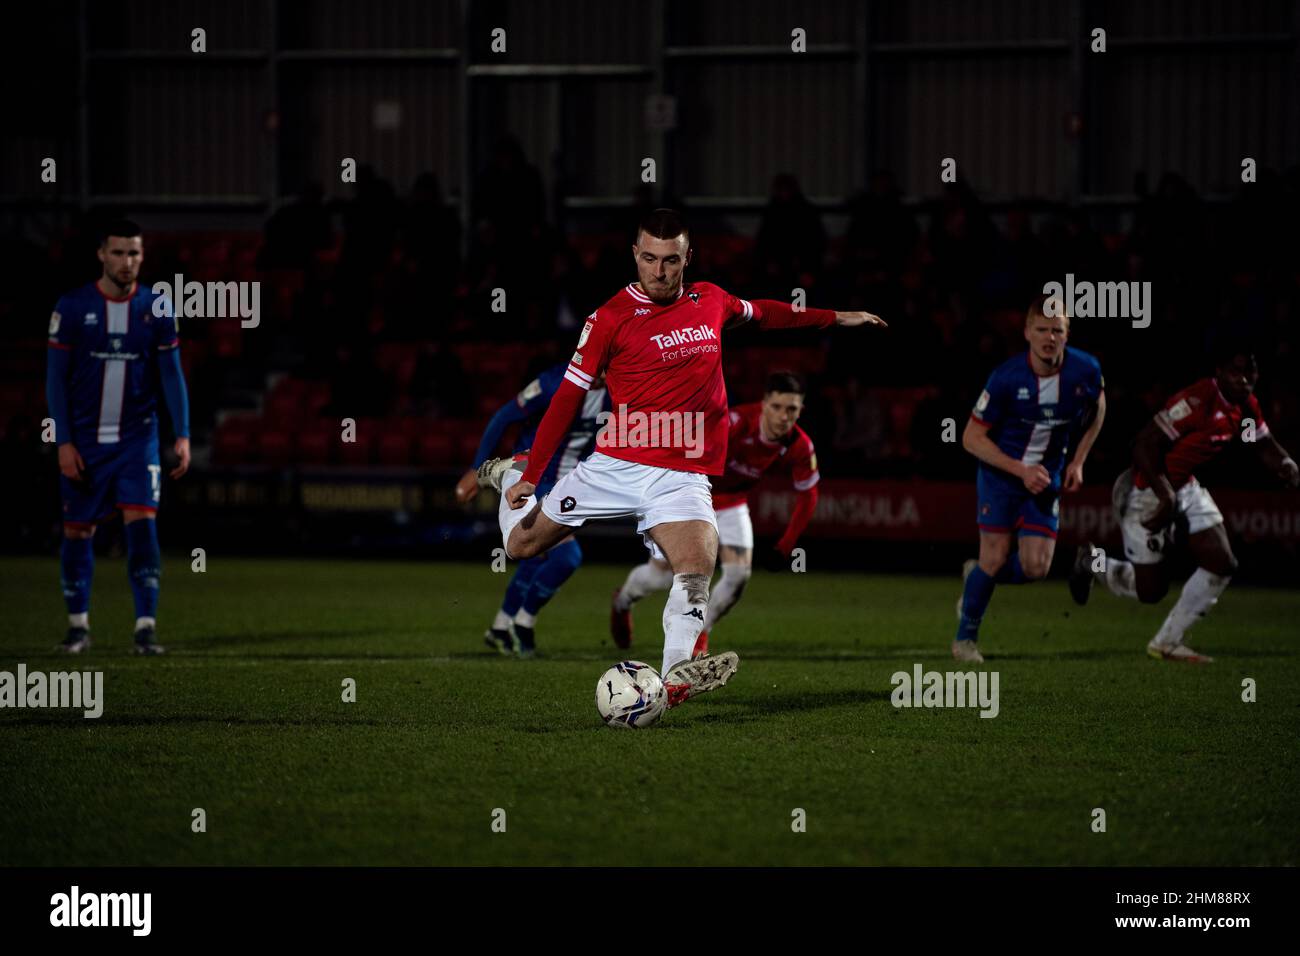 Ryan Watson marque son premier but pour Salford. Salford City 2-1 Carlisle United 1/2/22. Stade Peninsula, Salford. Banque D'Images